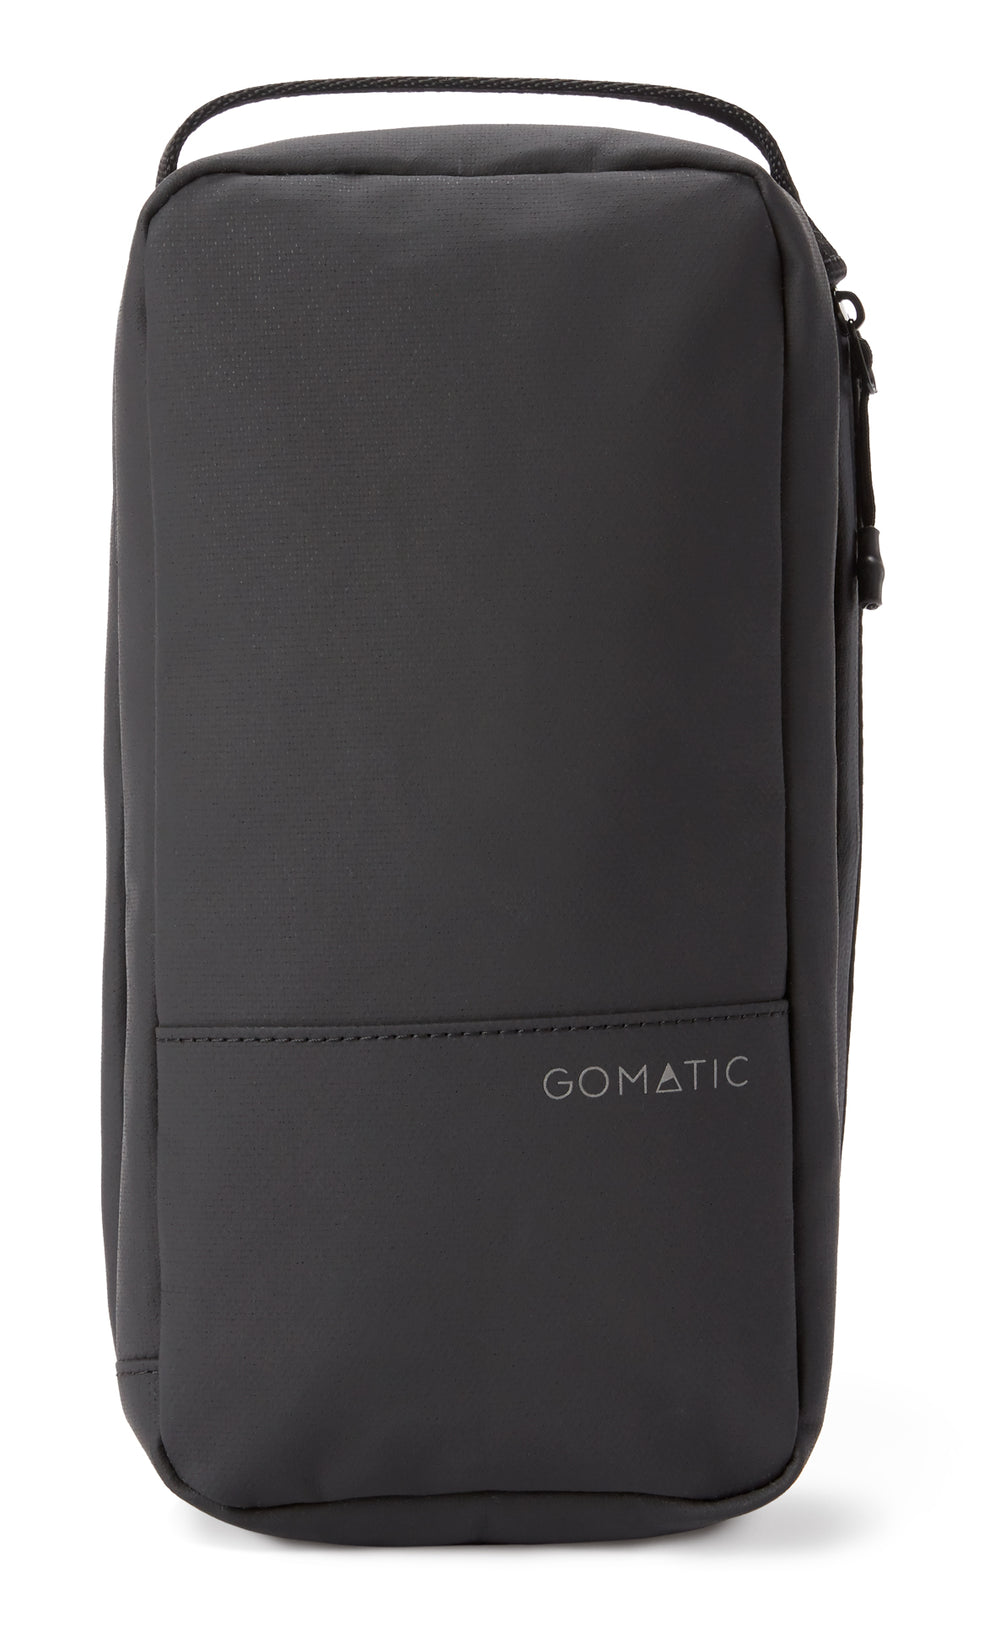 Tech Case - Gomatic Travel Bags and Packs